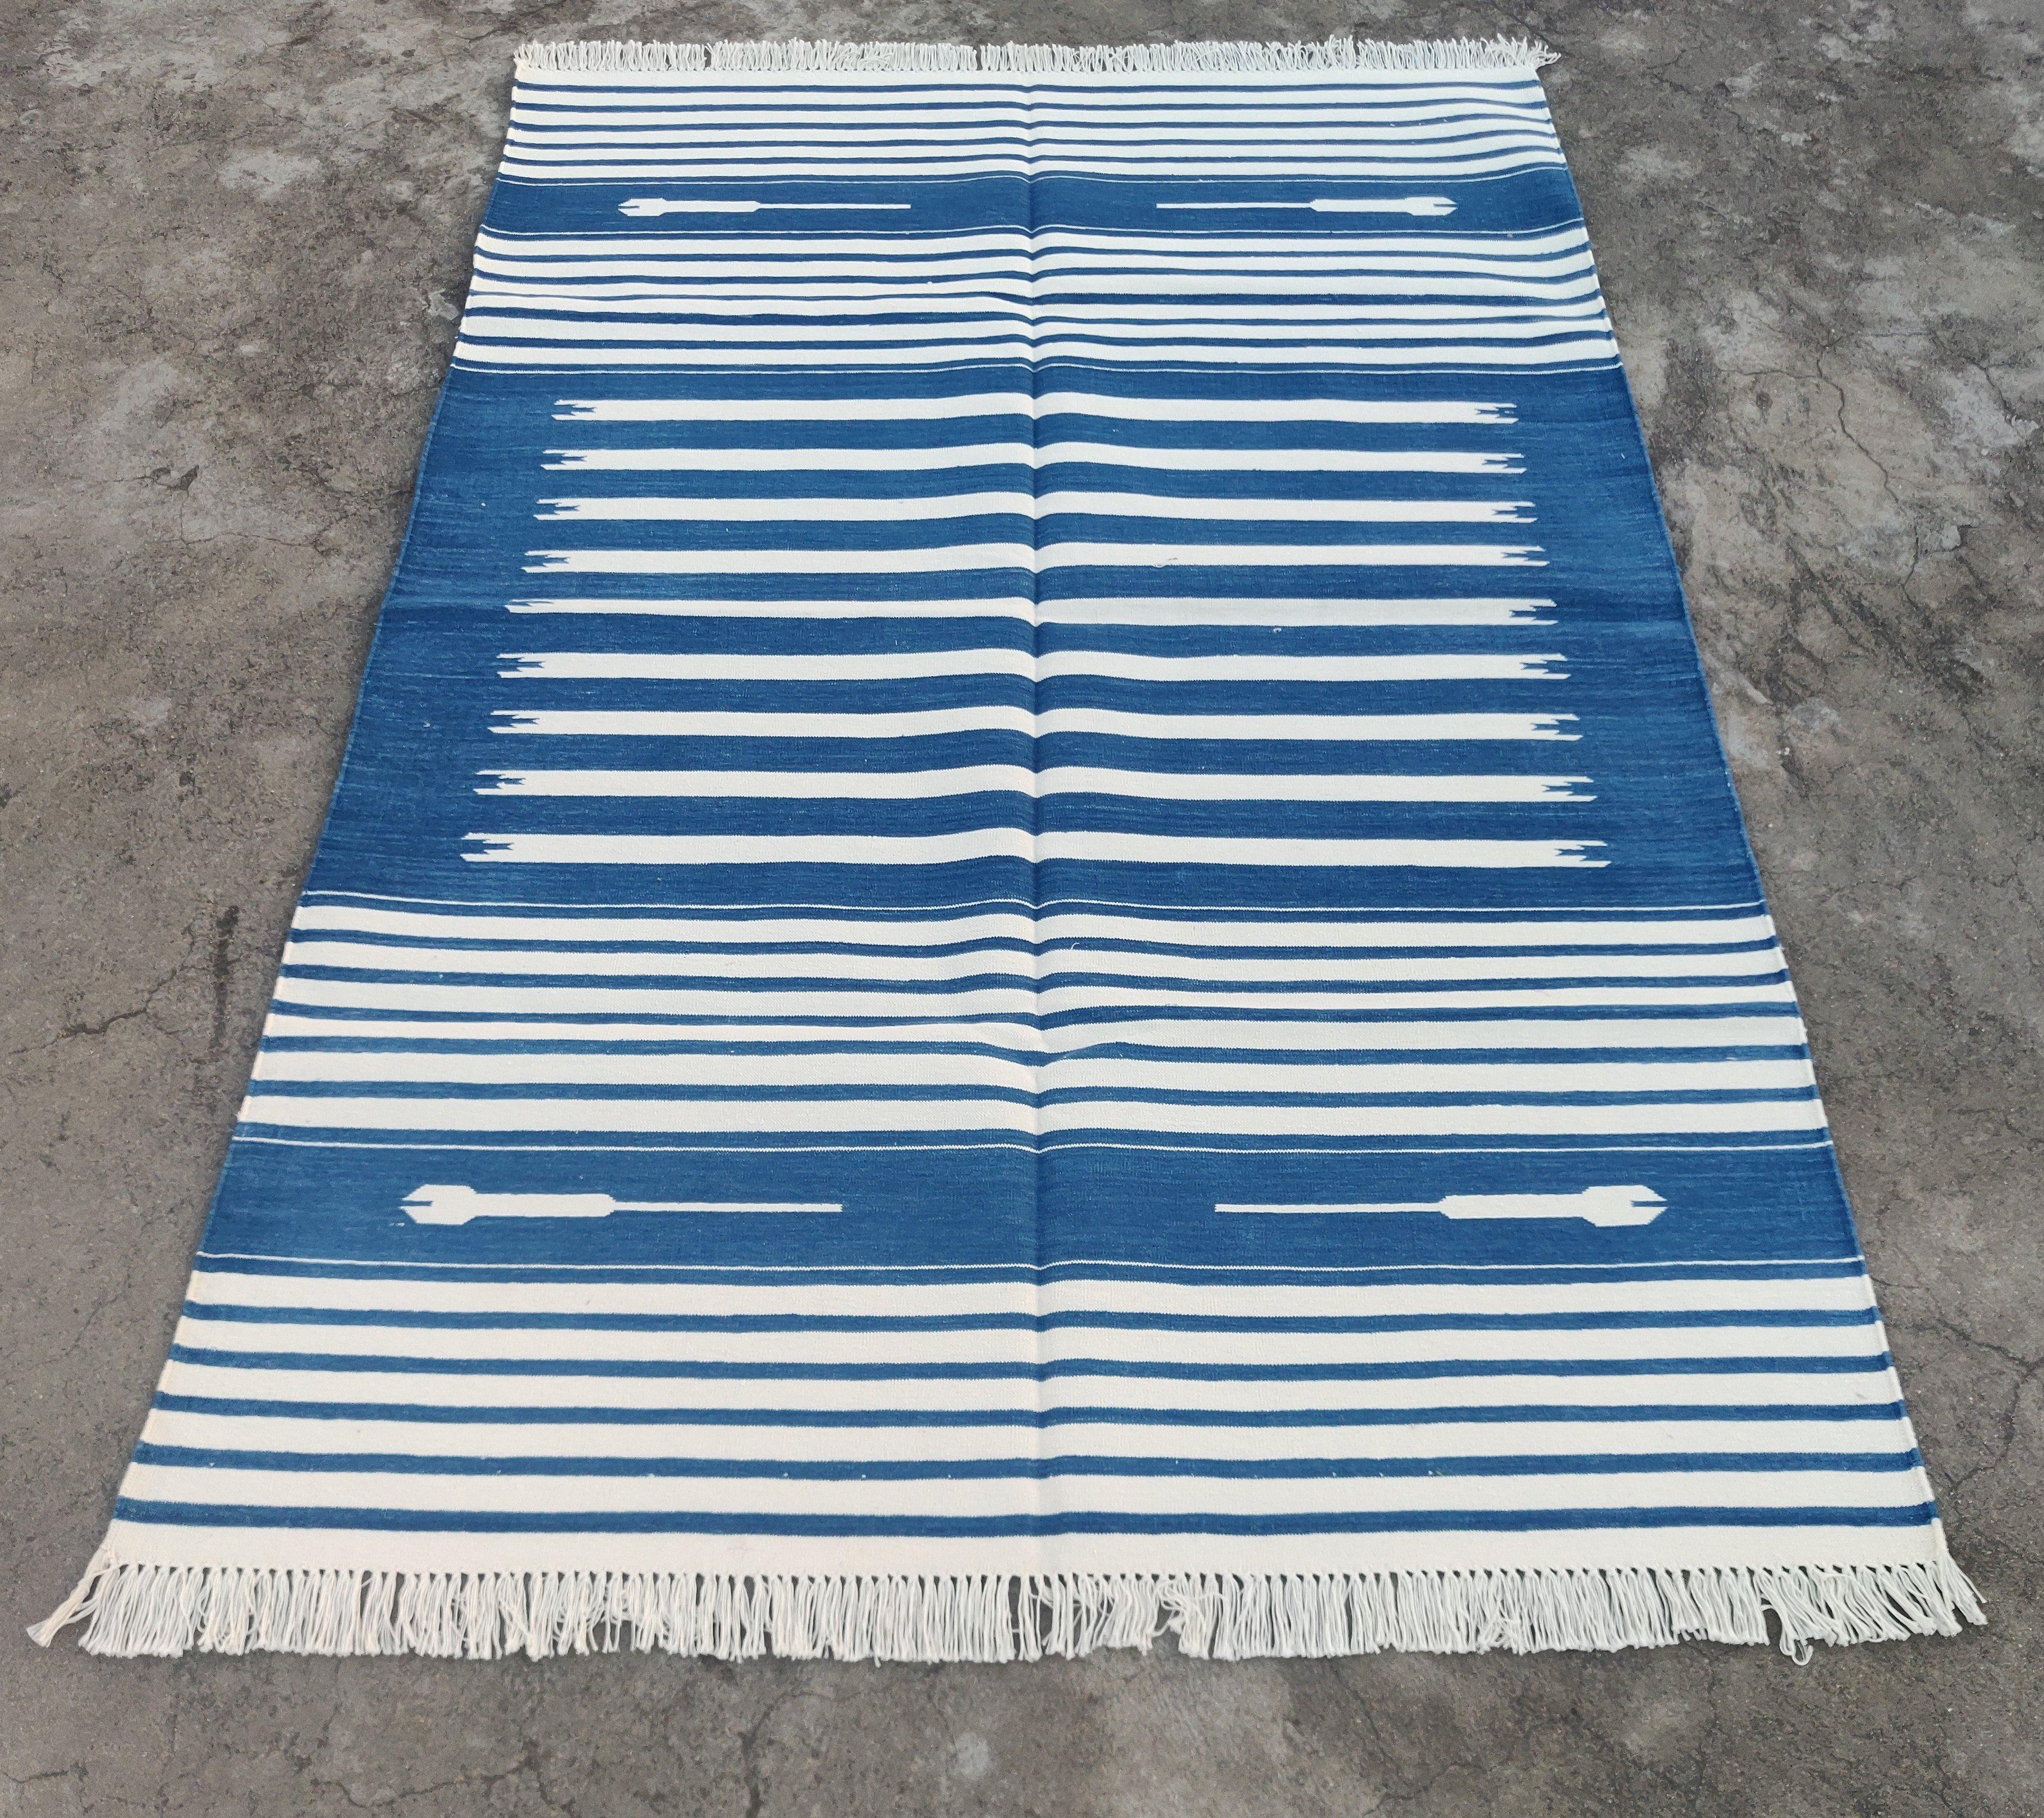 Handmade Cotton Area Flat Weave Rug, 4x6 Blue And White Striped Indian Dhurrie In New Condition For Sale In Jaipur, IN